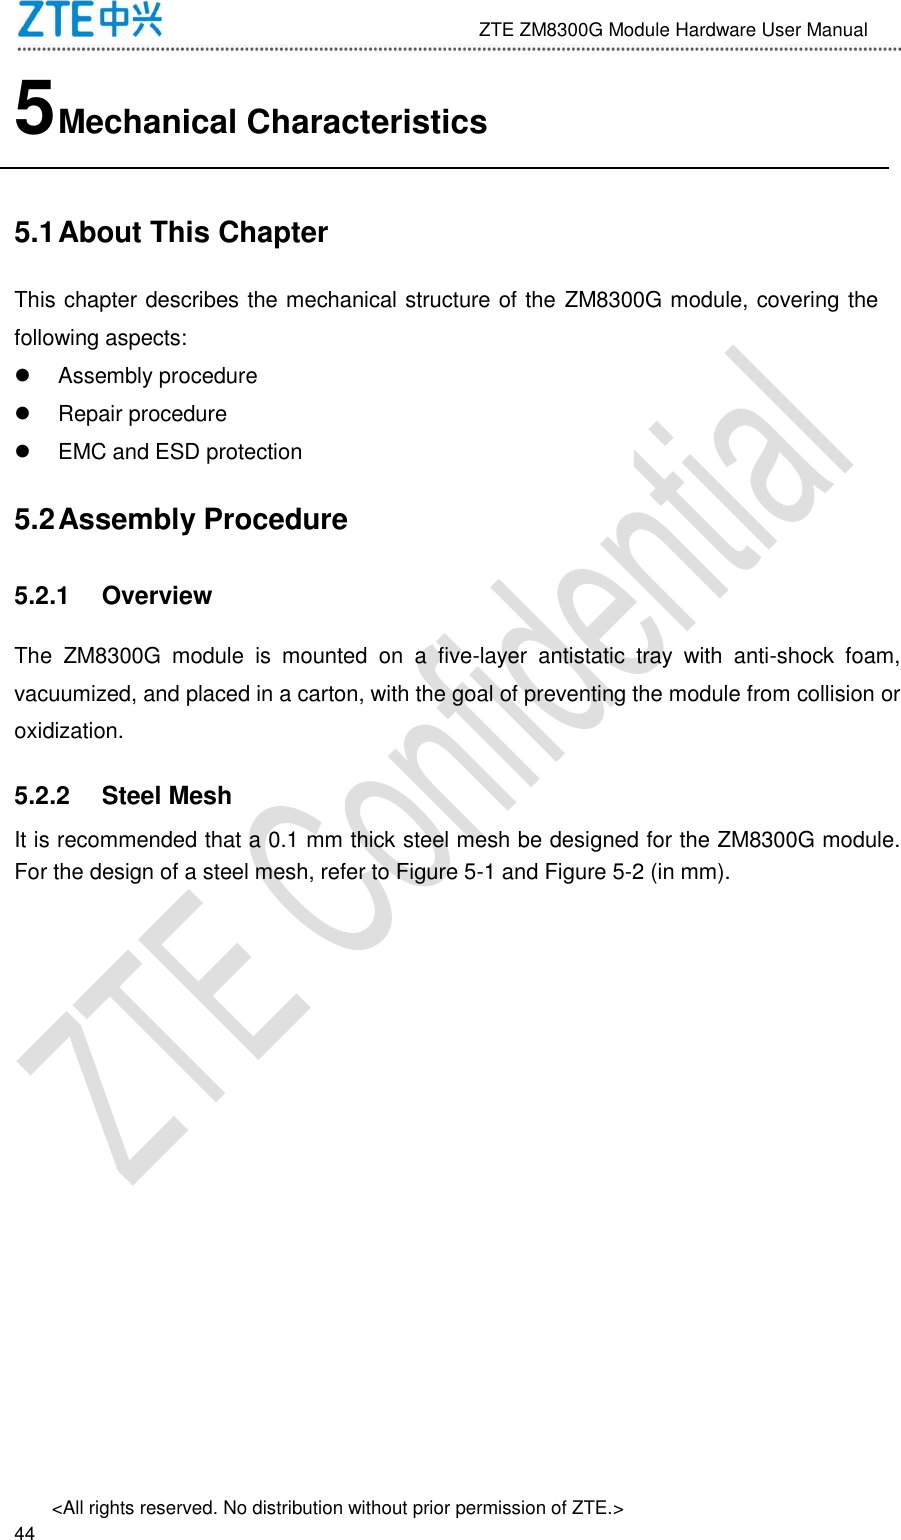                              ZTE ZM8300G Module Hardware User Manual &lt;All rights reserved. No distribution without prior permission of ZTE.&gt;                                                               44 5 Mechanical Characteristics 5.1 About This Chapter This chapter describes the mechanical structure of the ZM8300G module, covering the following aspects:   Assembly procedure   Repair procedure   EMC and ESD protection 5.2 Assembly Procedure 5.2.1  Overview The  ZM8300G  module  is  mounted  on  a  five-layer  antistatic  tray  with  anti-shock  foam, vacuumized, and placed in a carton, with the goal of preventing the module from collision or oxidization. 5.2.2  Steel Mesh It is recommended that a 0.1 mm thick steel mesh be designed for the ZM8300G module. For the design of a steel mesh, refer to Figure 5-1 and Figure 5-2 (in mm). 